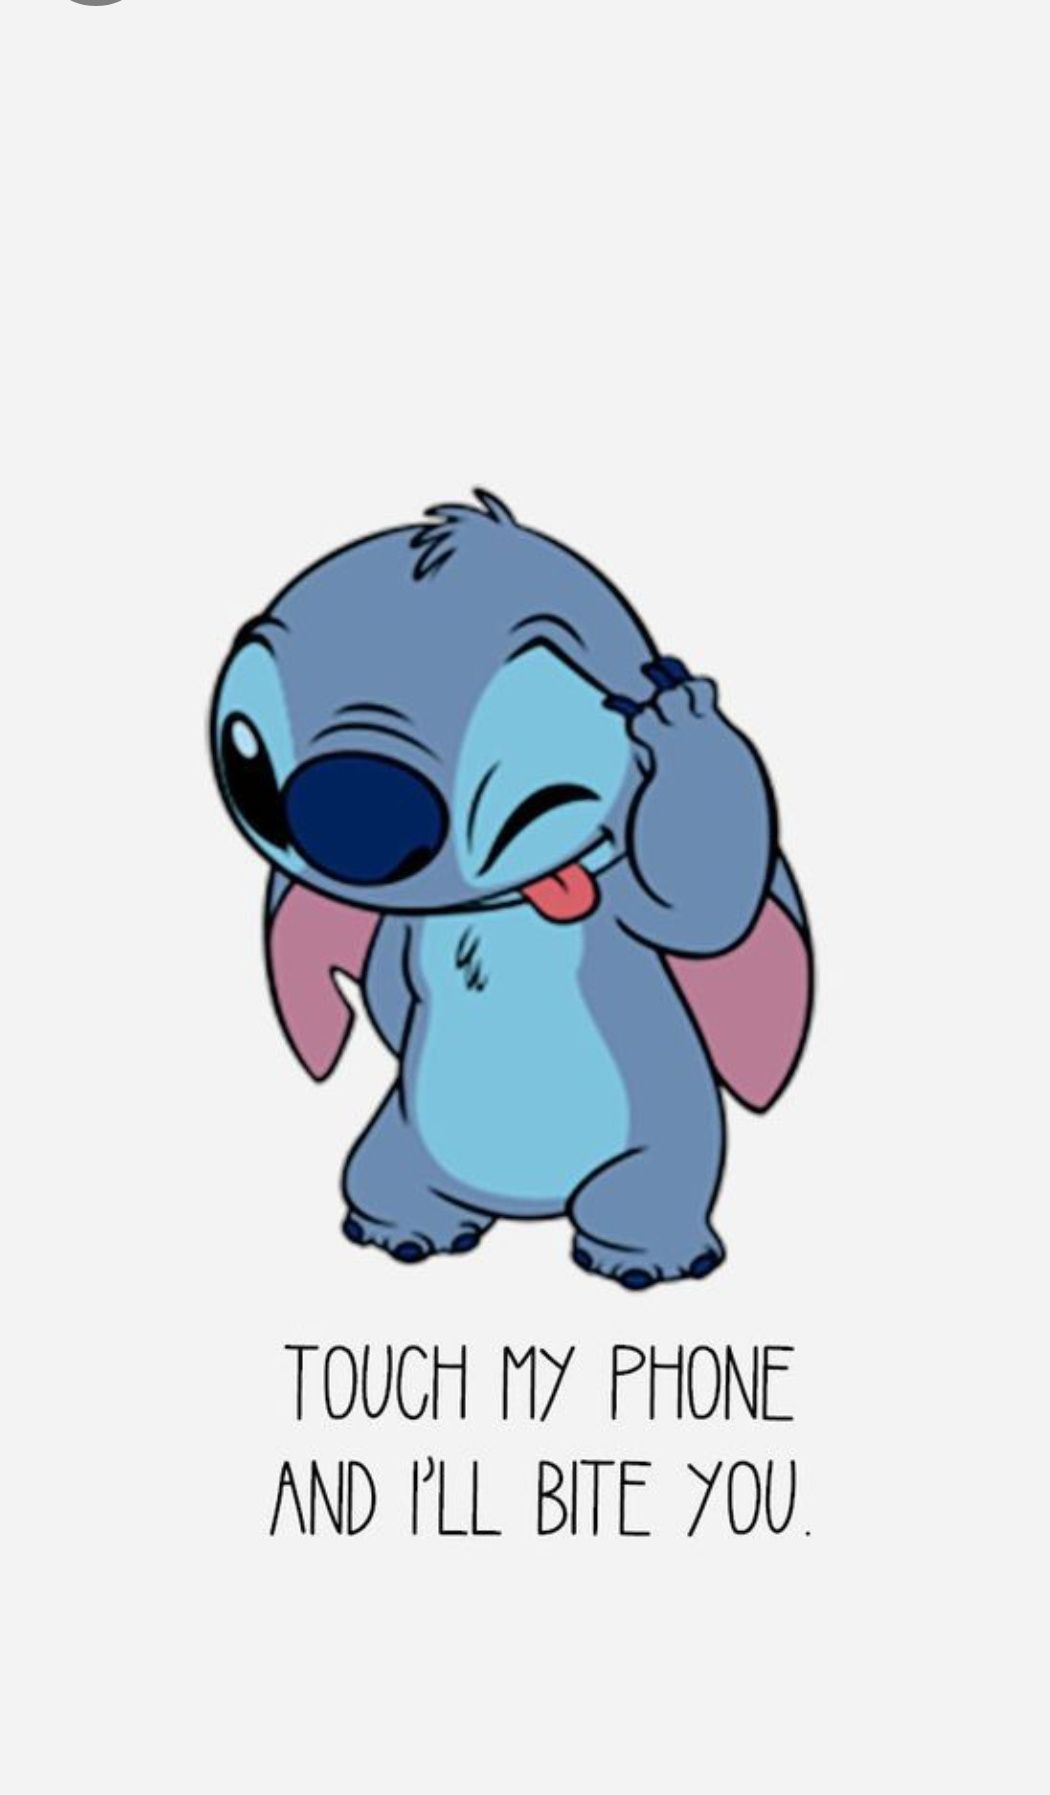 Why Are You On My Phone Wallpapers Wallpaper Cave Big collection of dont touch my phone hd wallpapers for phone and tablet. my phone wallpapers wallpaper cave